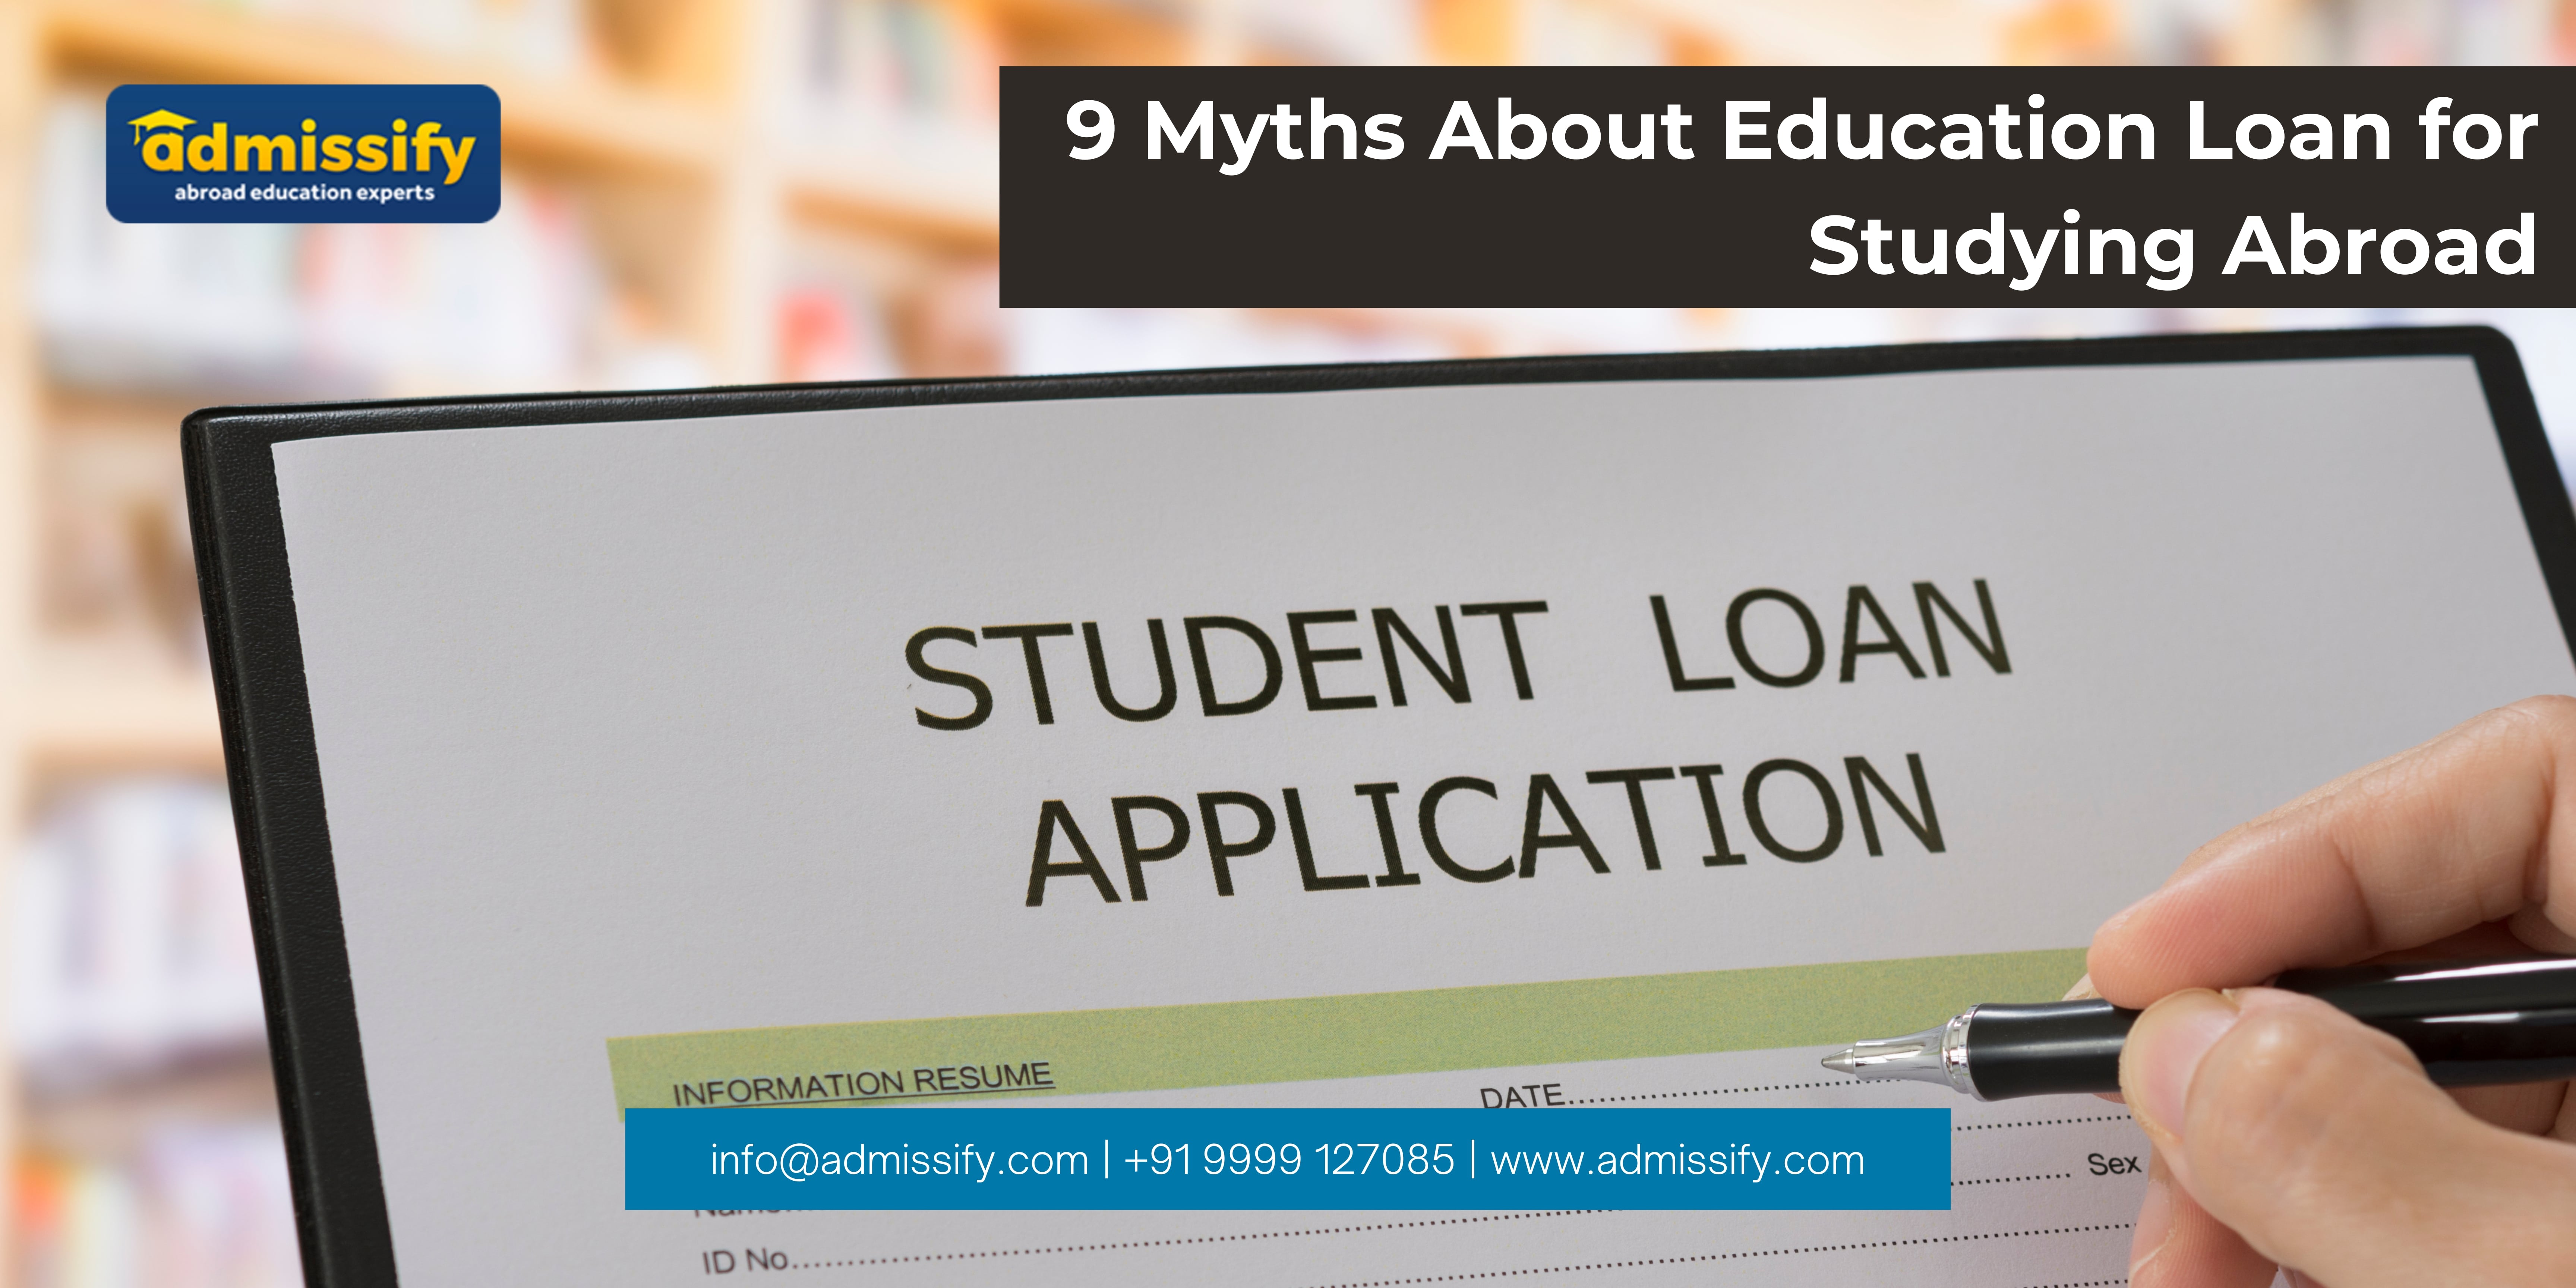 Education loan for studying abroad